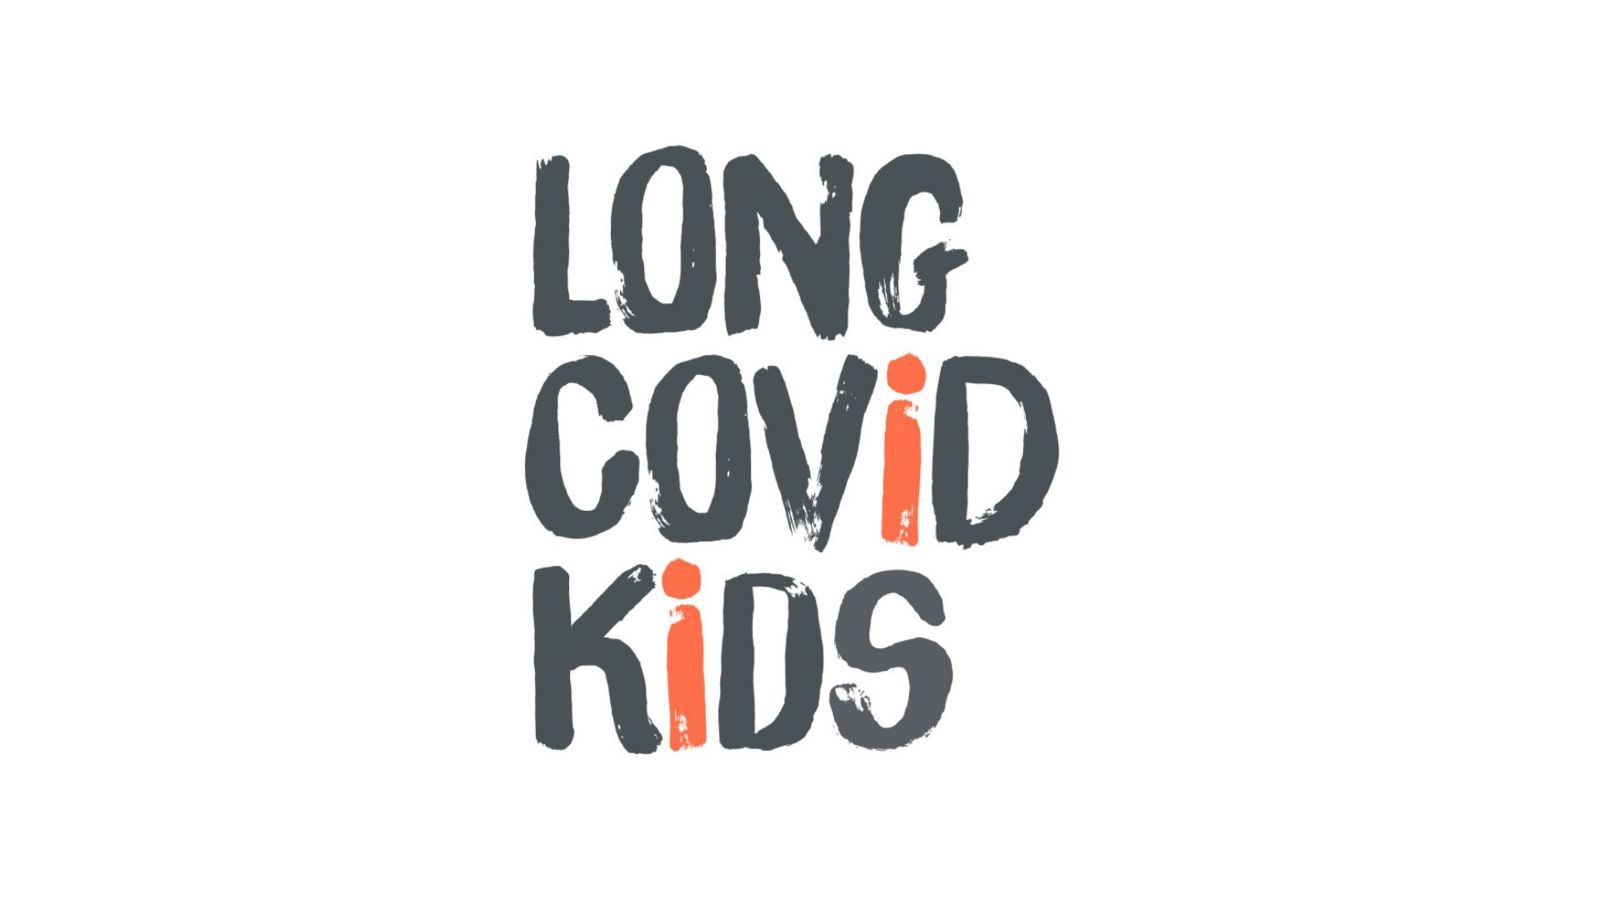 Black writing 'Long COVID Kids' with both 'i's in orange shaped like a person. 